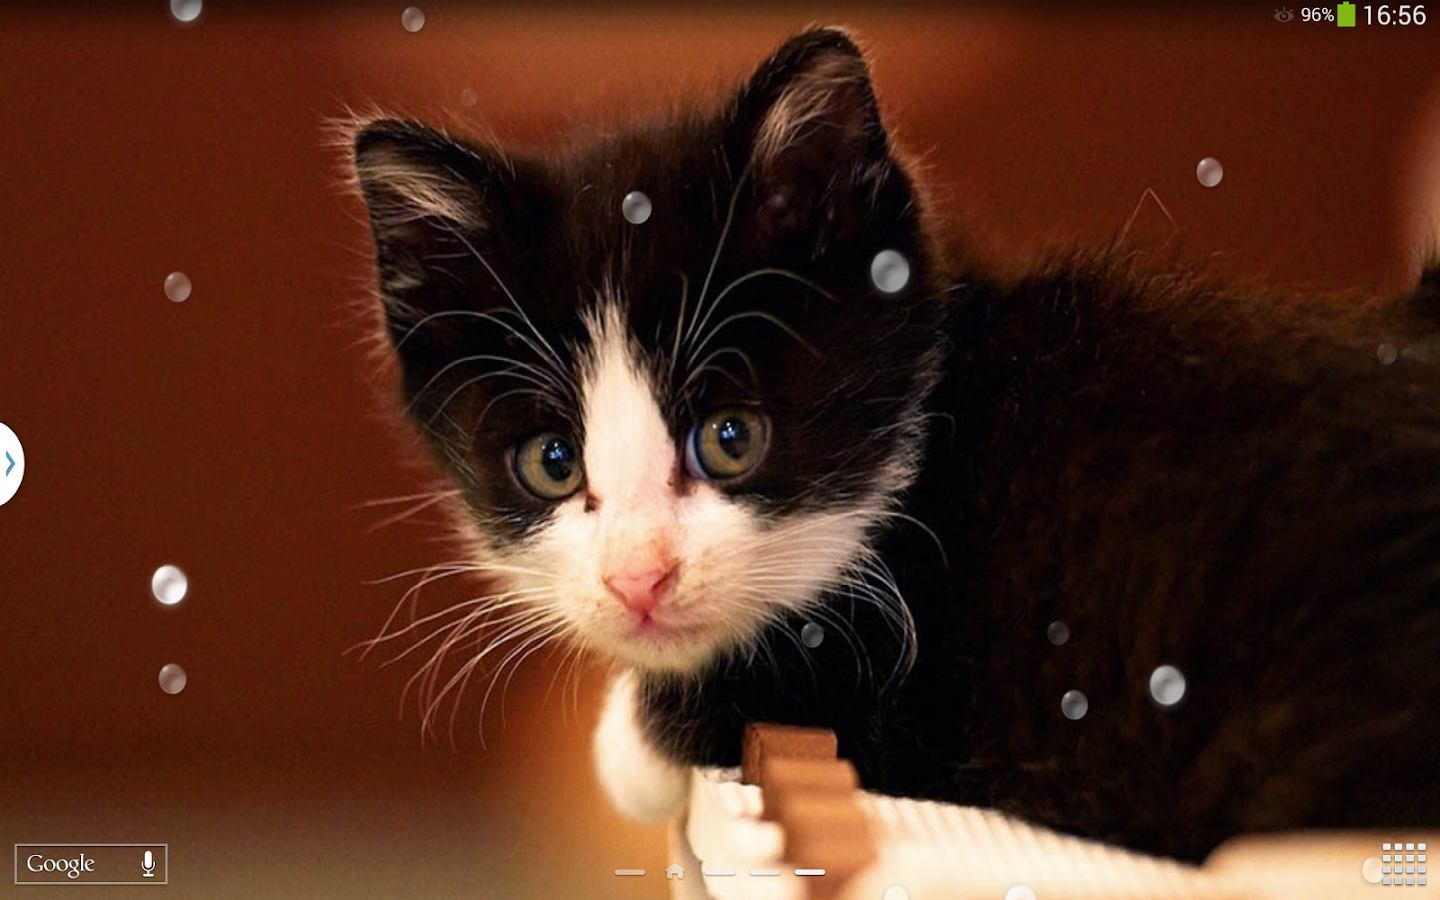  Cute  Cats  Live  Wallpaper  Android Apps on Google Play